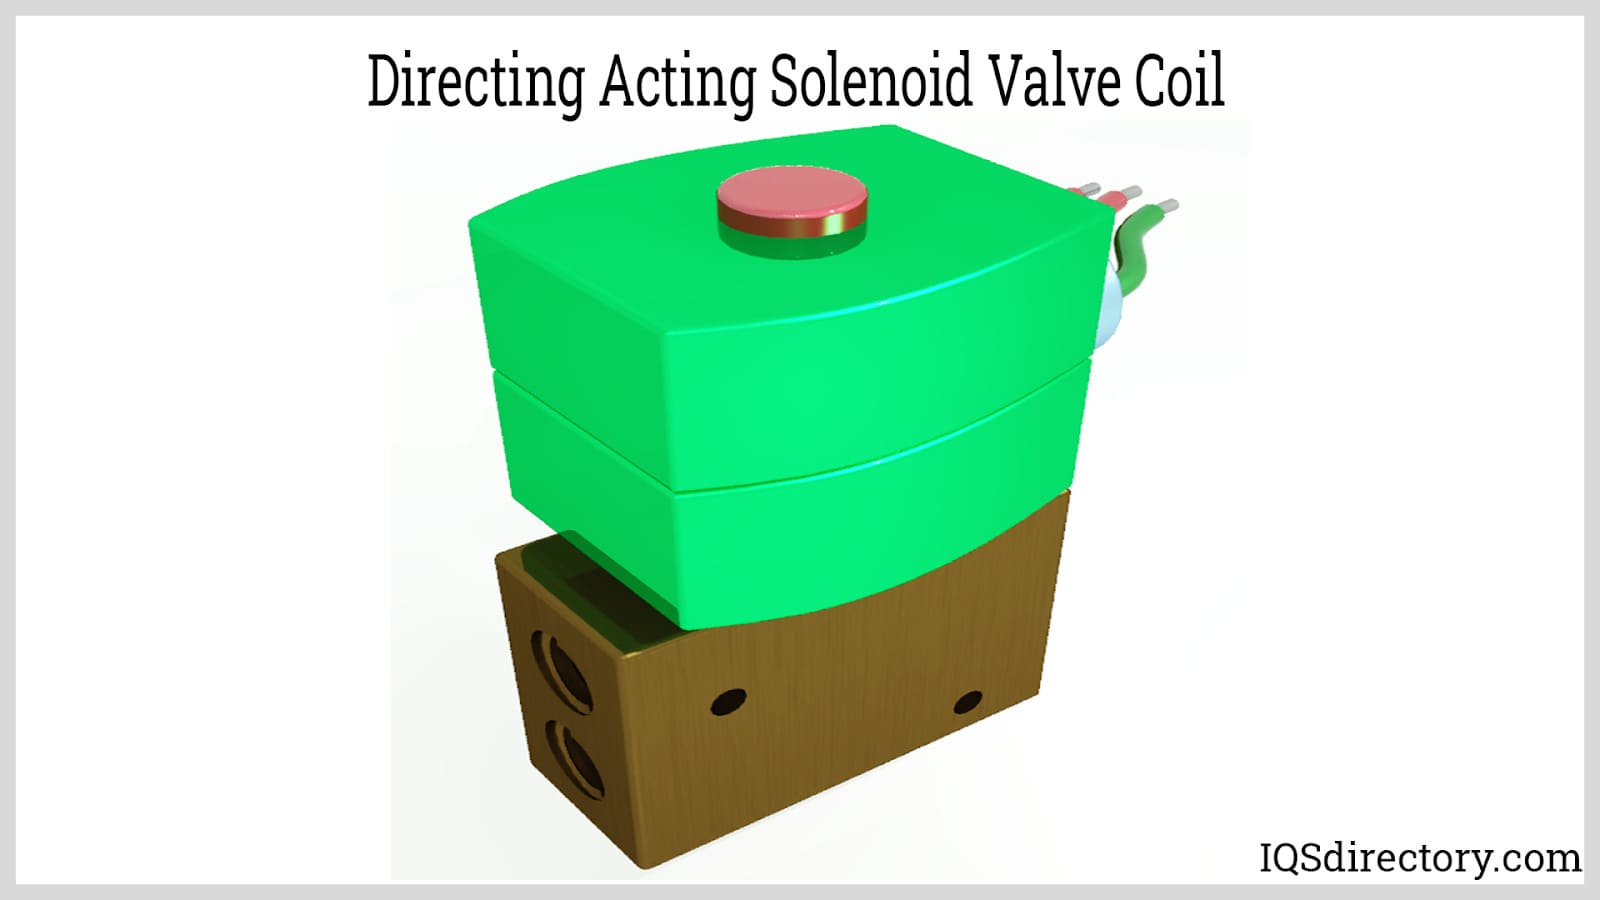 Directing Acting Solenoid Valve Coil